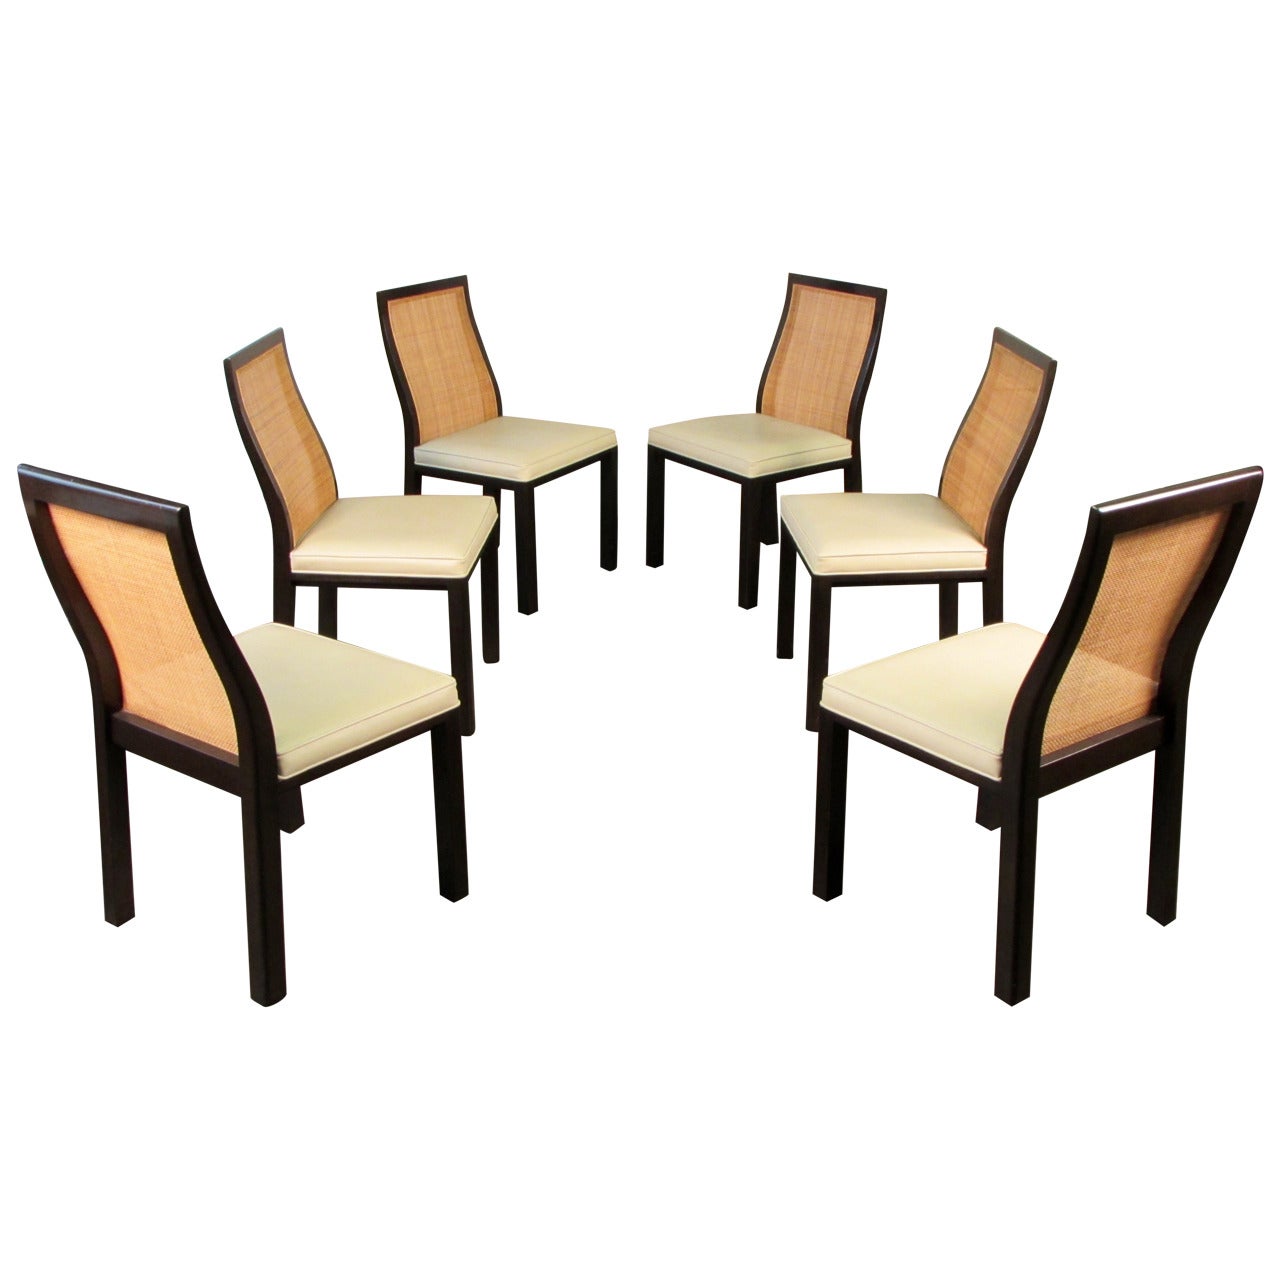 Set of Six Sculptural Mahogany "Otter" Dining Chairs by Harvey Probber, 1965